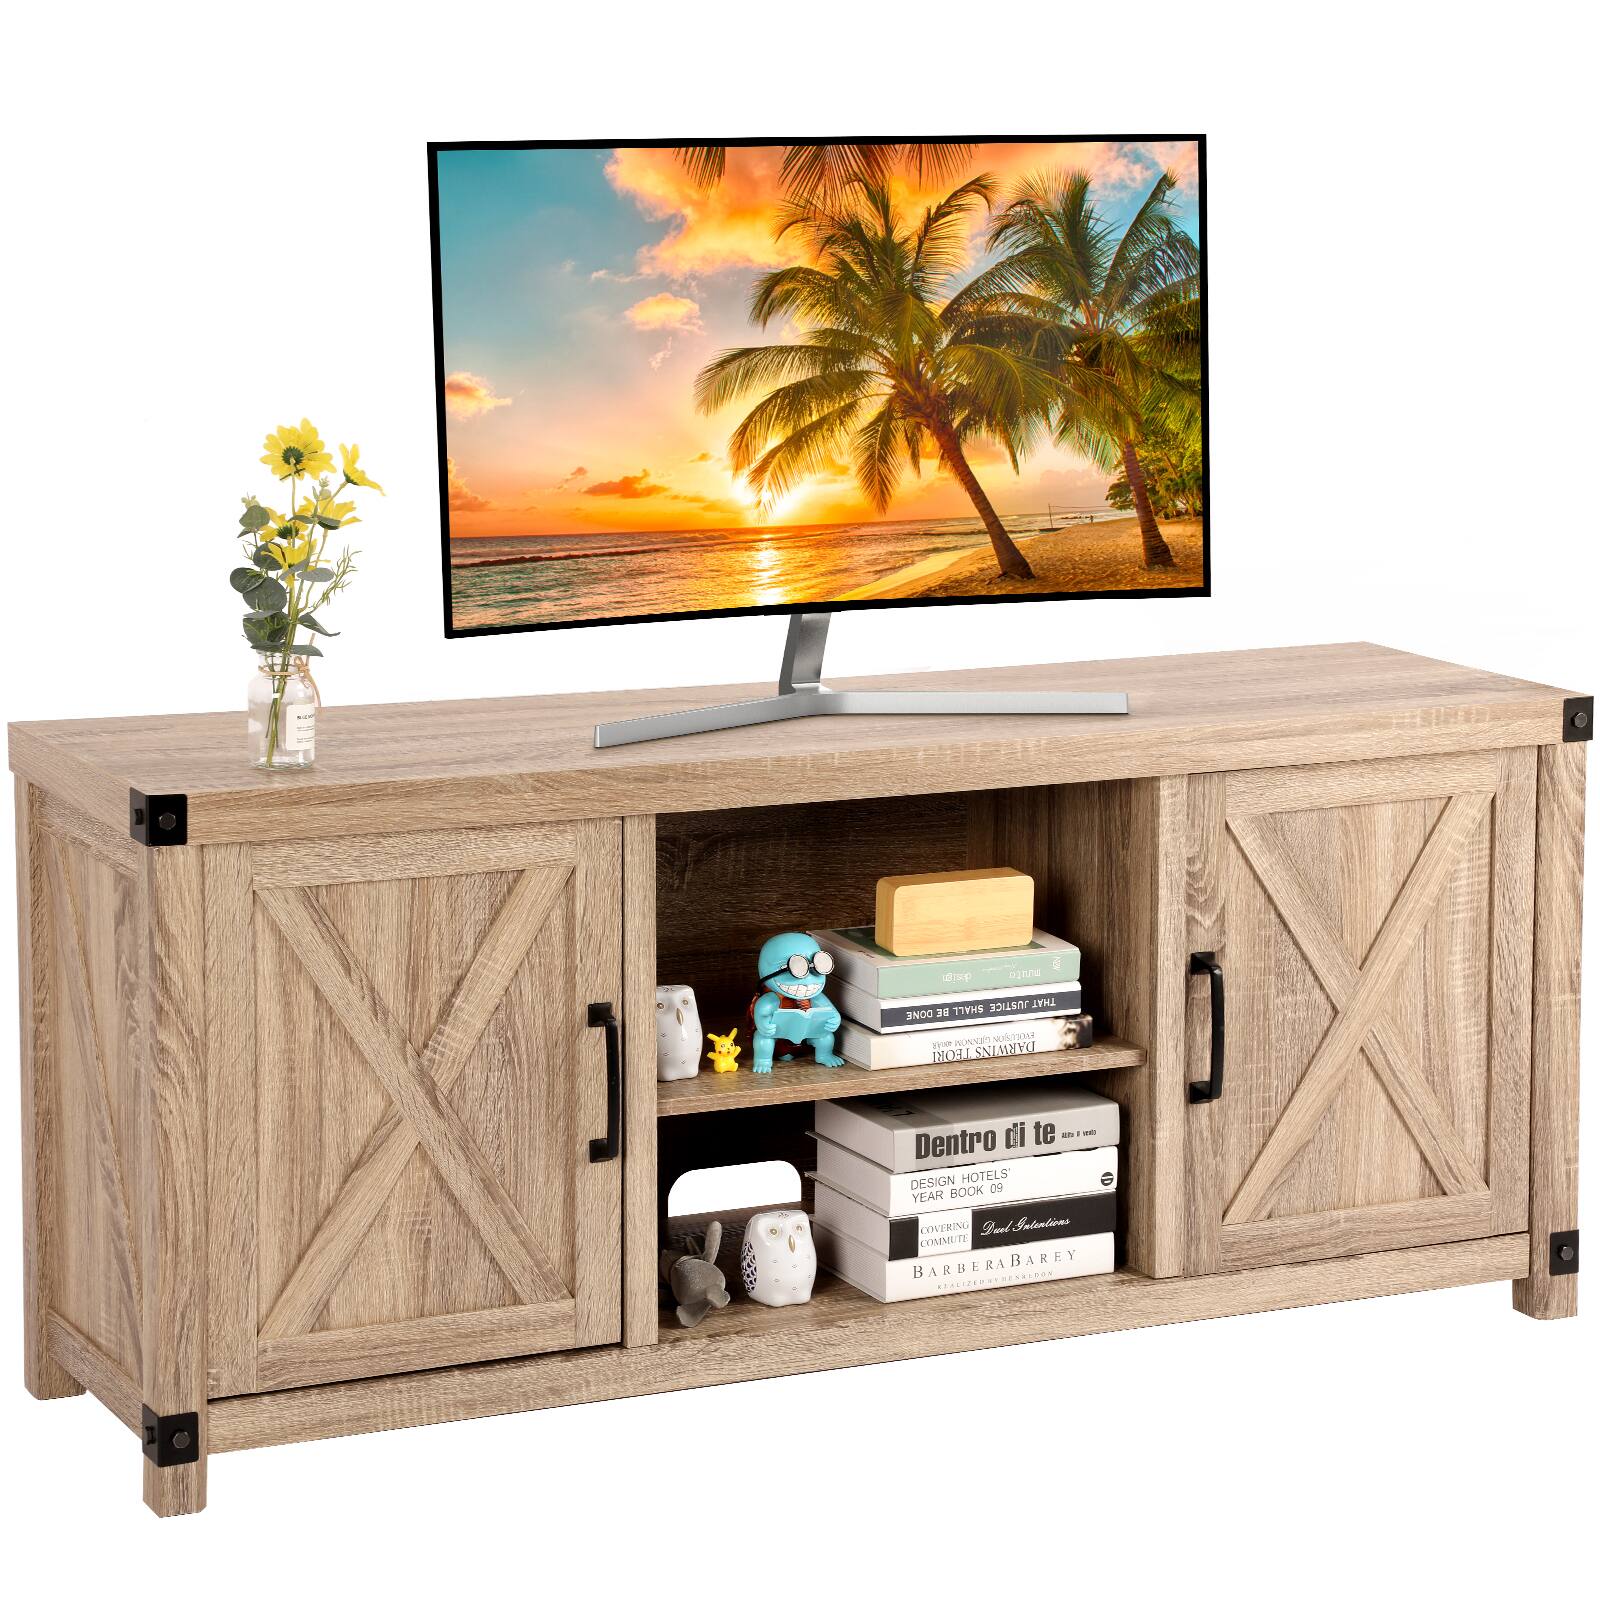 PERLESMITH TV Console Cabinet for TVs up to 65 inch with Media Shelves and Storage for $149.90 + Free Shipping